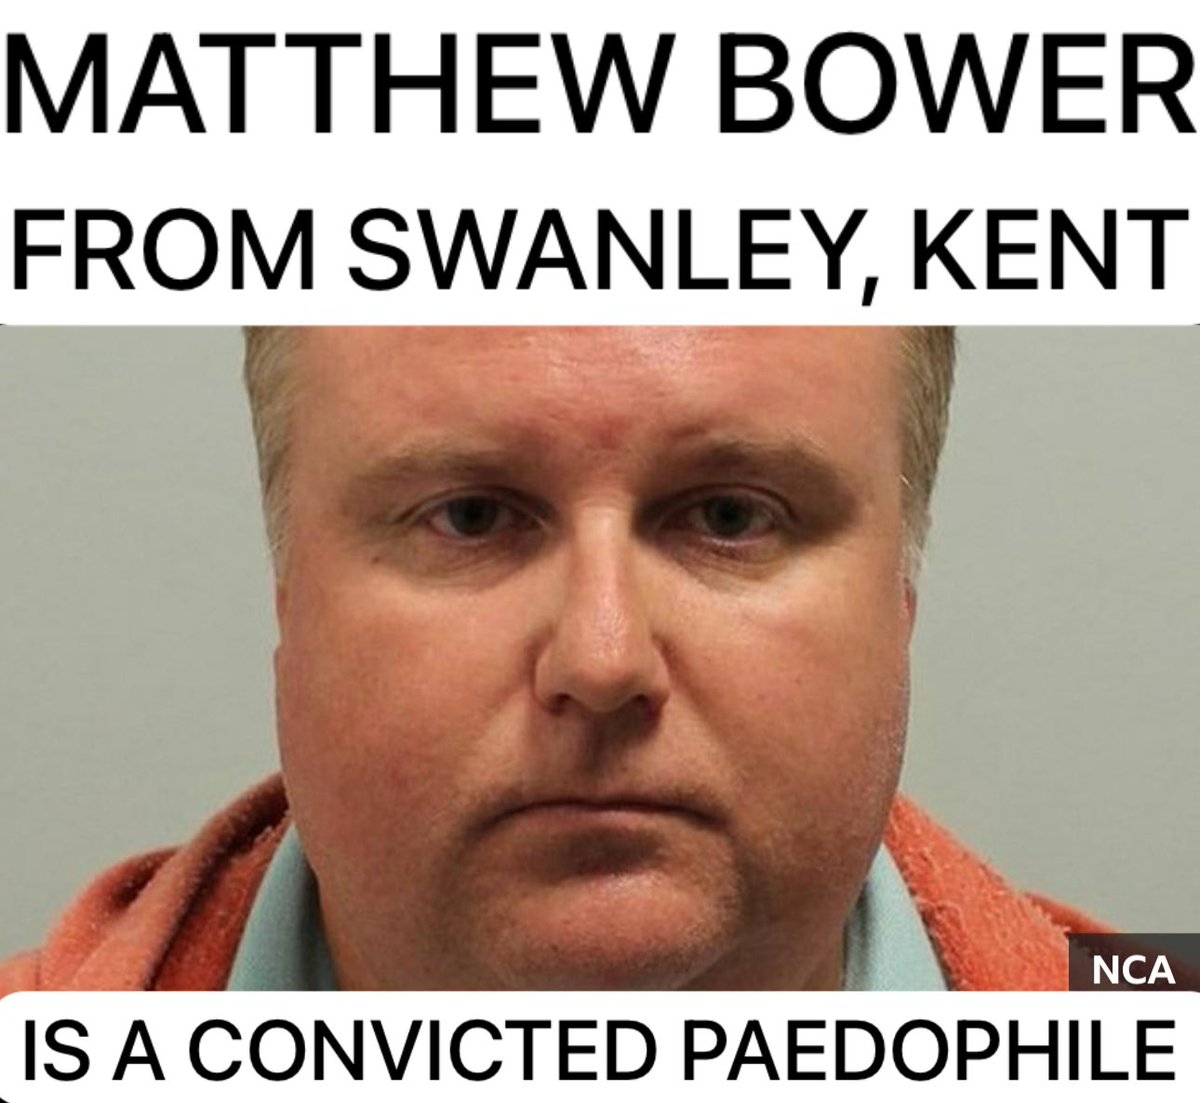 Matthew Bower has been jailed for encouraging and paying for the sexual abuse of children around the world

#NationalCrimeAgency officers identified #MatthewBower of #Swanley #Kent after receiving information from the #FBI

#BringBackTheDeathPenalty
#MatthewBowerIsAPaedophile